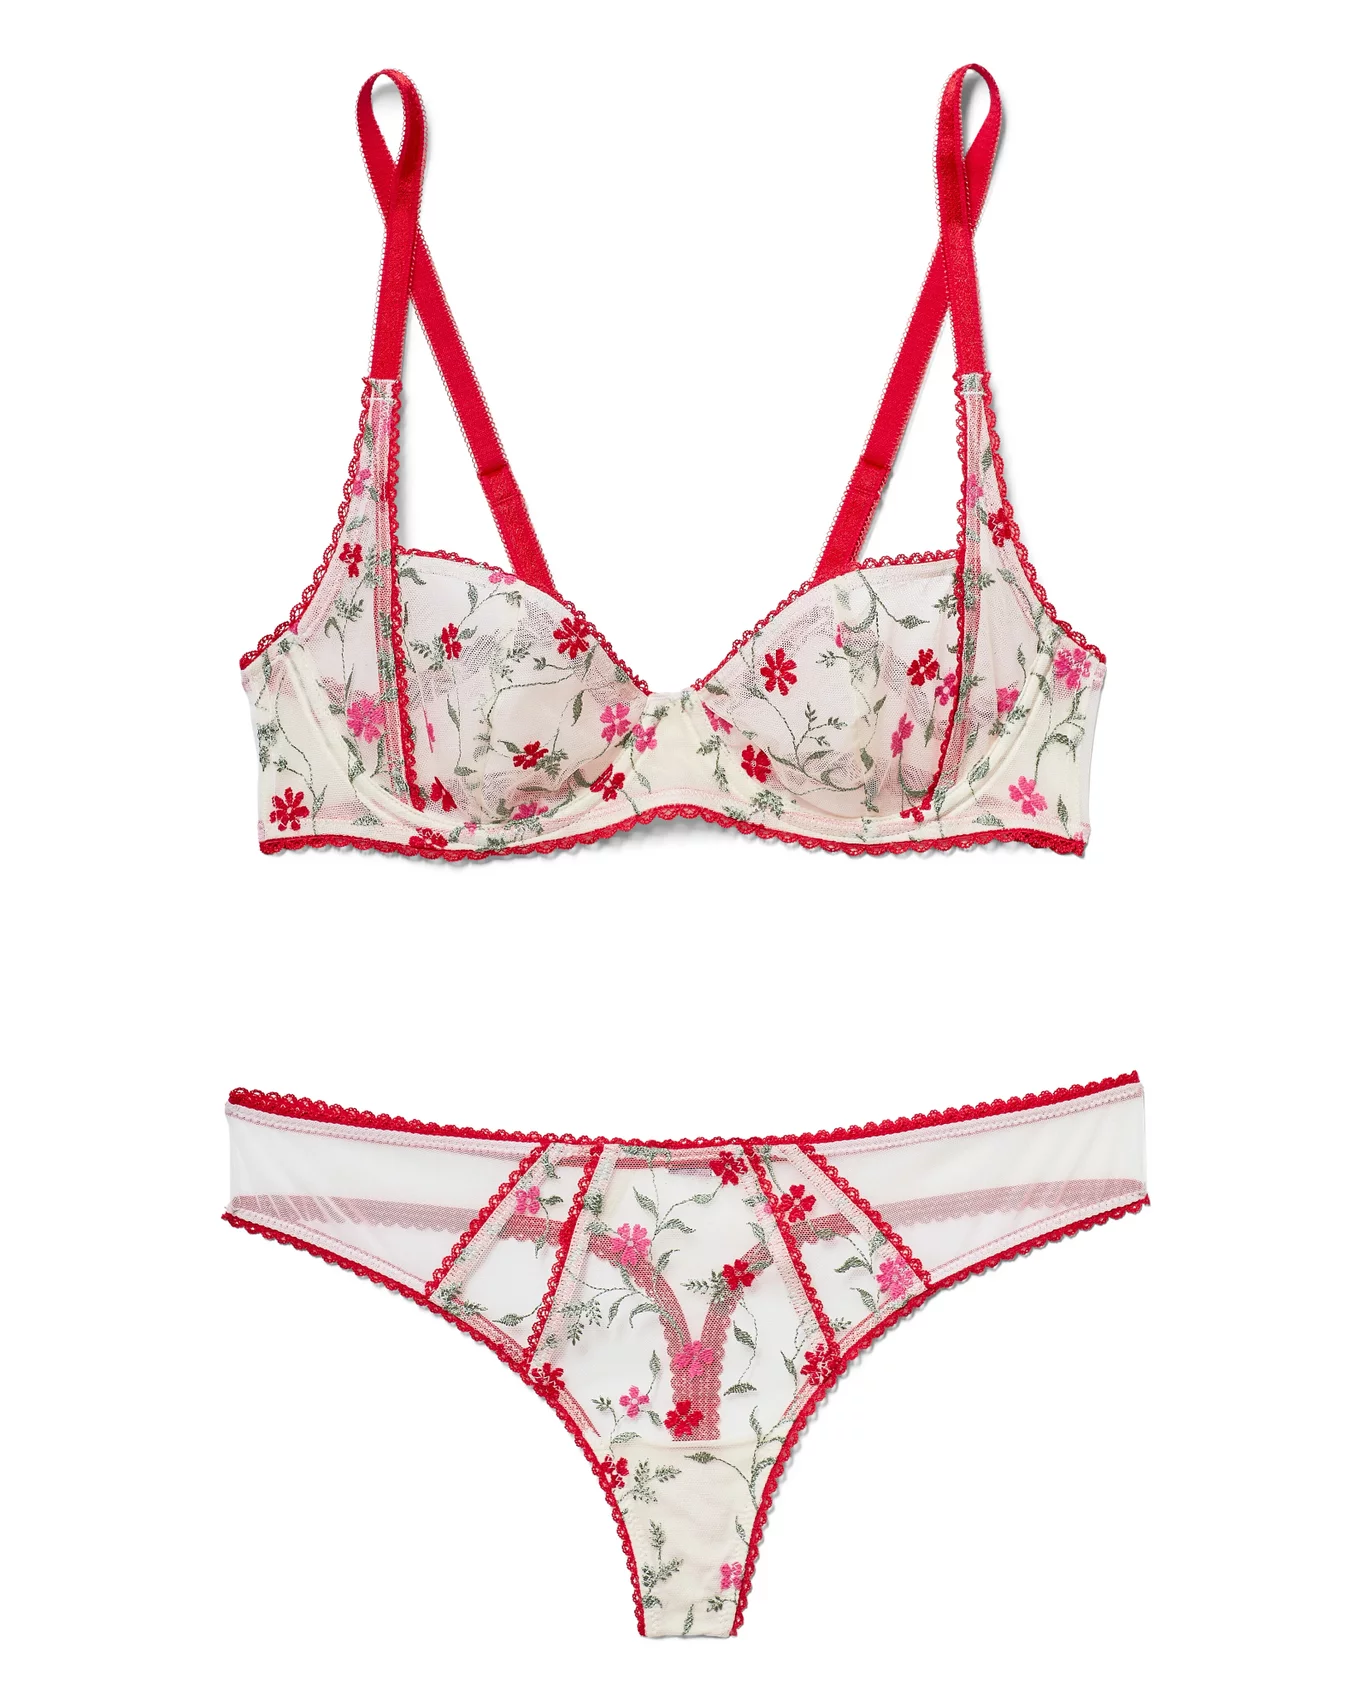 Red women underwear and spring Tulips flowers on white. Red bra and pantie.  Copy space. Beauty, fashion blogger concept. Romantic lingerie for  Valentine's day temptation.Erotic concept.Floral pattern. Stock Photo